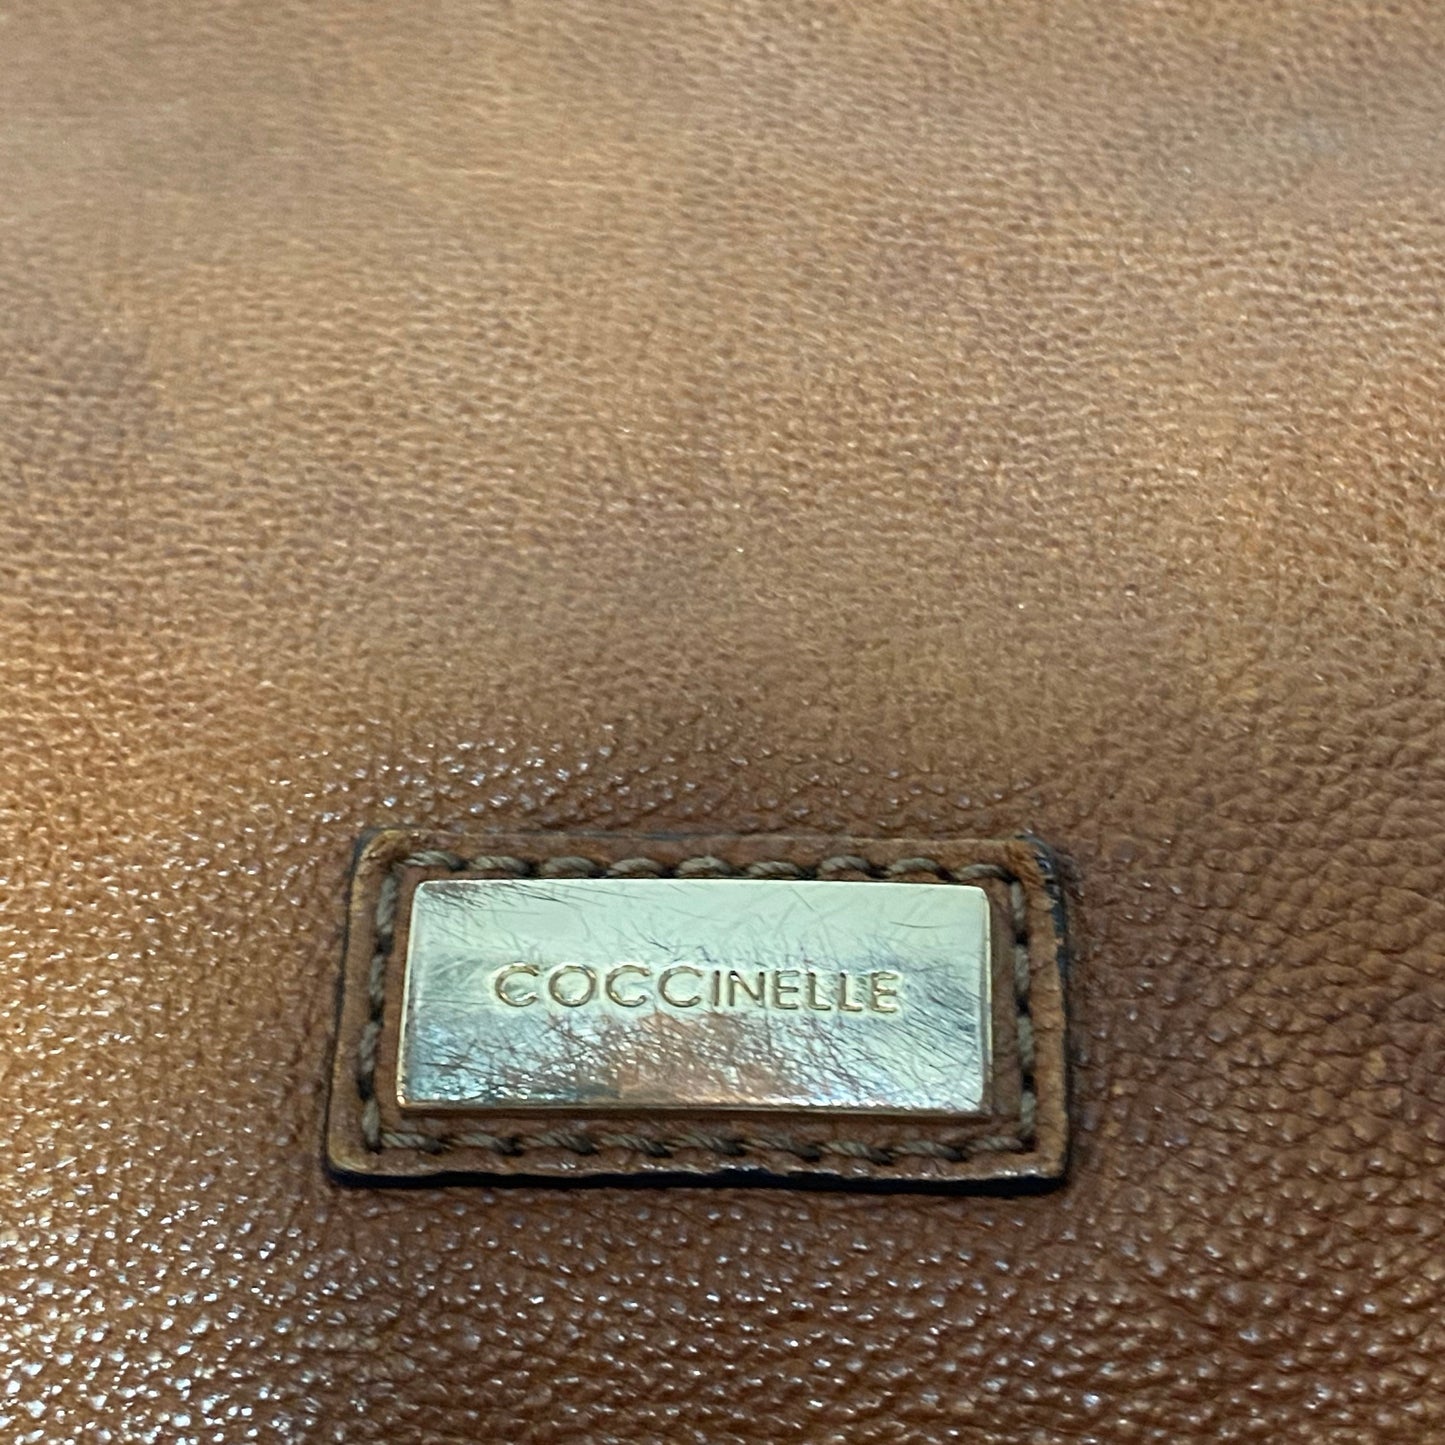 Coccinelle 90s, brown cuir bag with golden metal clasp and details,made in  Italy Mint